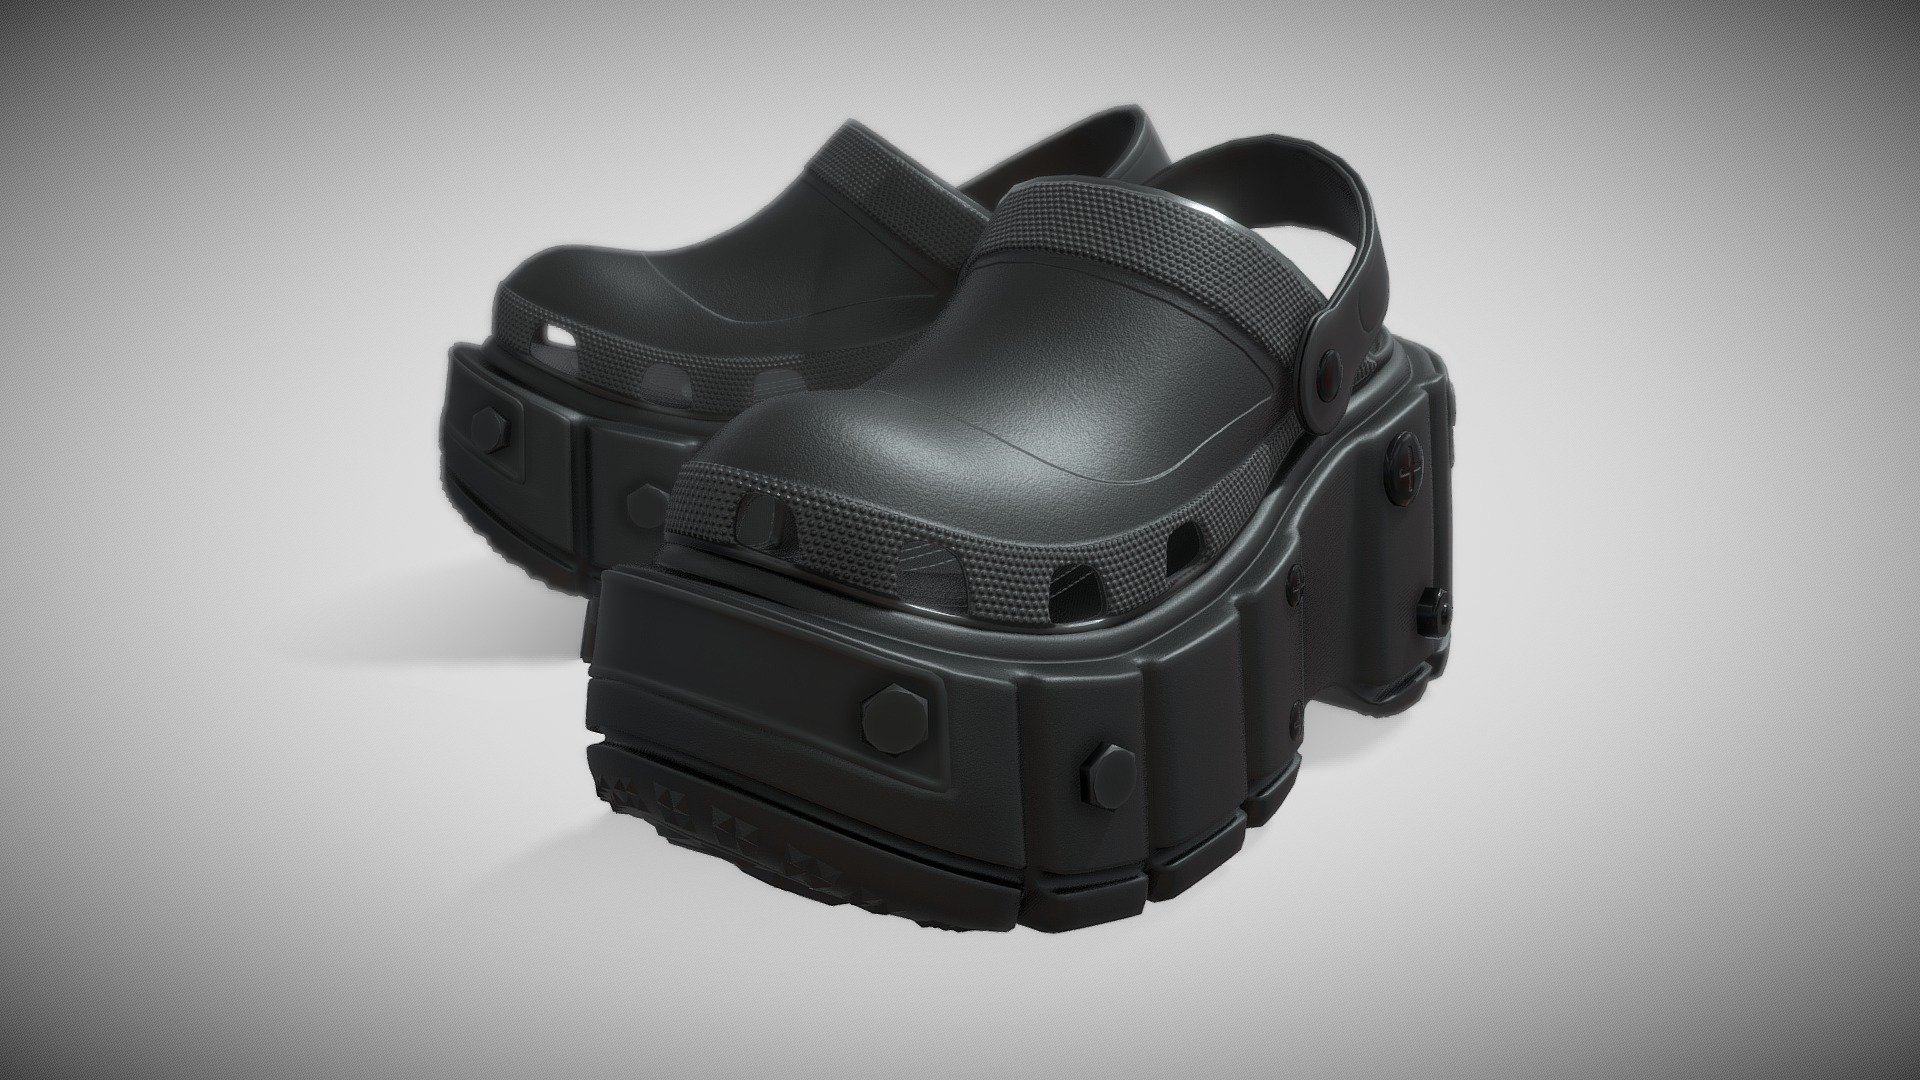 Hard Crocs sandals Lowpoly 3D model PBR Textures
To increase the speed of each artist in all tasks, we need a library of suitable models for various purposes. In this package, I prepared high-quality low-poly assets including shoes, PBR textures
Crocs Hard Crocs sandals Low-poly 3D model PBR Textures in the market:
https://artstn.co/m/g7o6W - Hard Crocs sandals Lowpoly 3D model PBR Textures - 3D model by s.javadhashemi 3d model